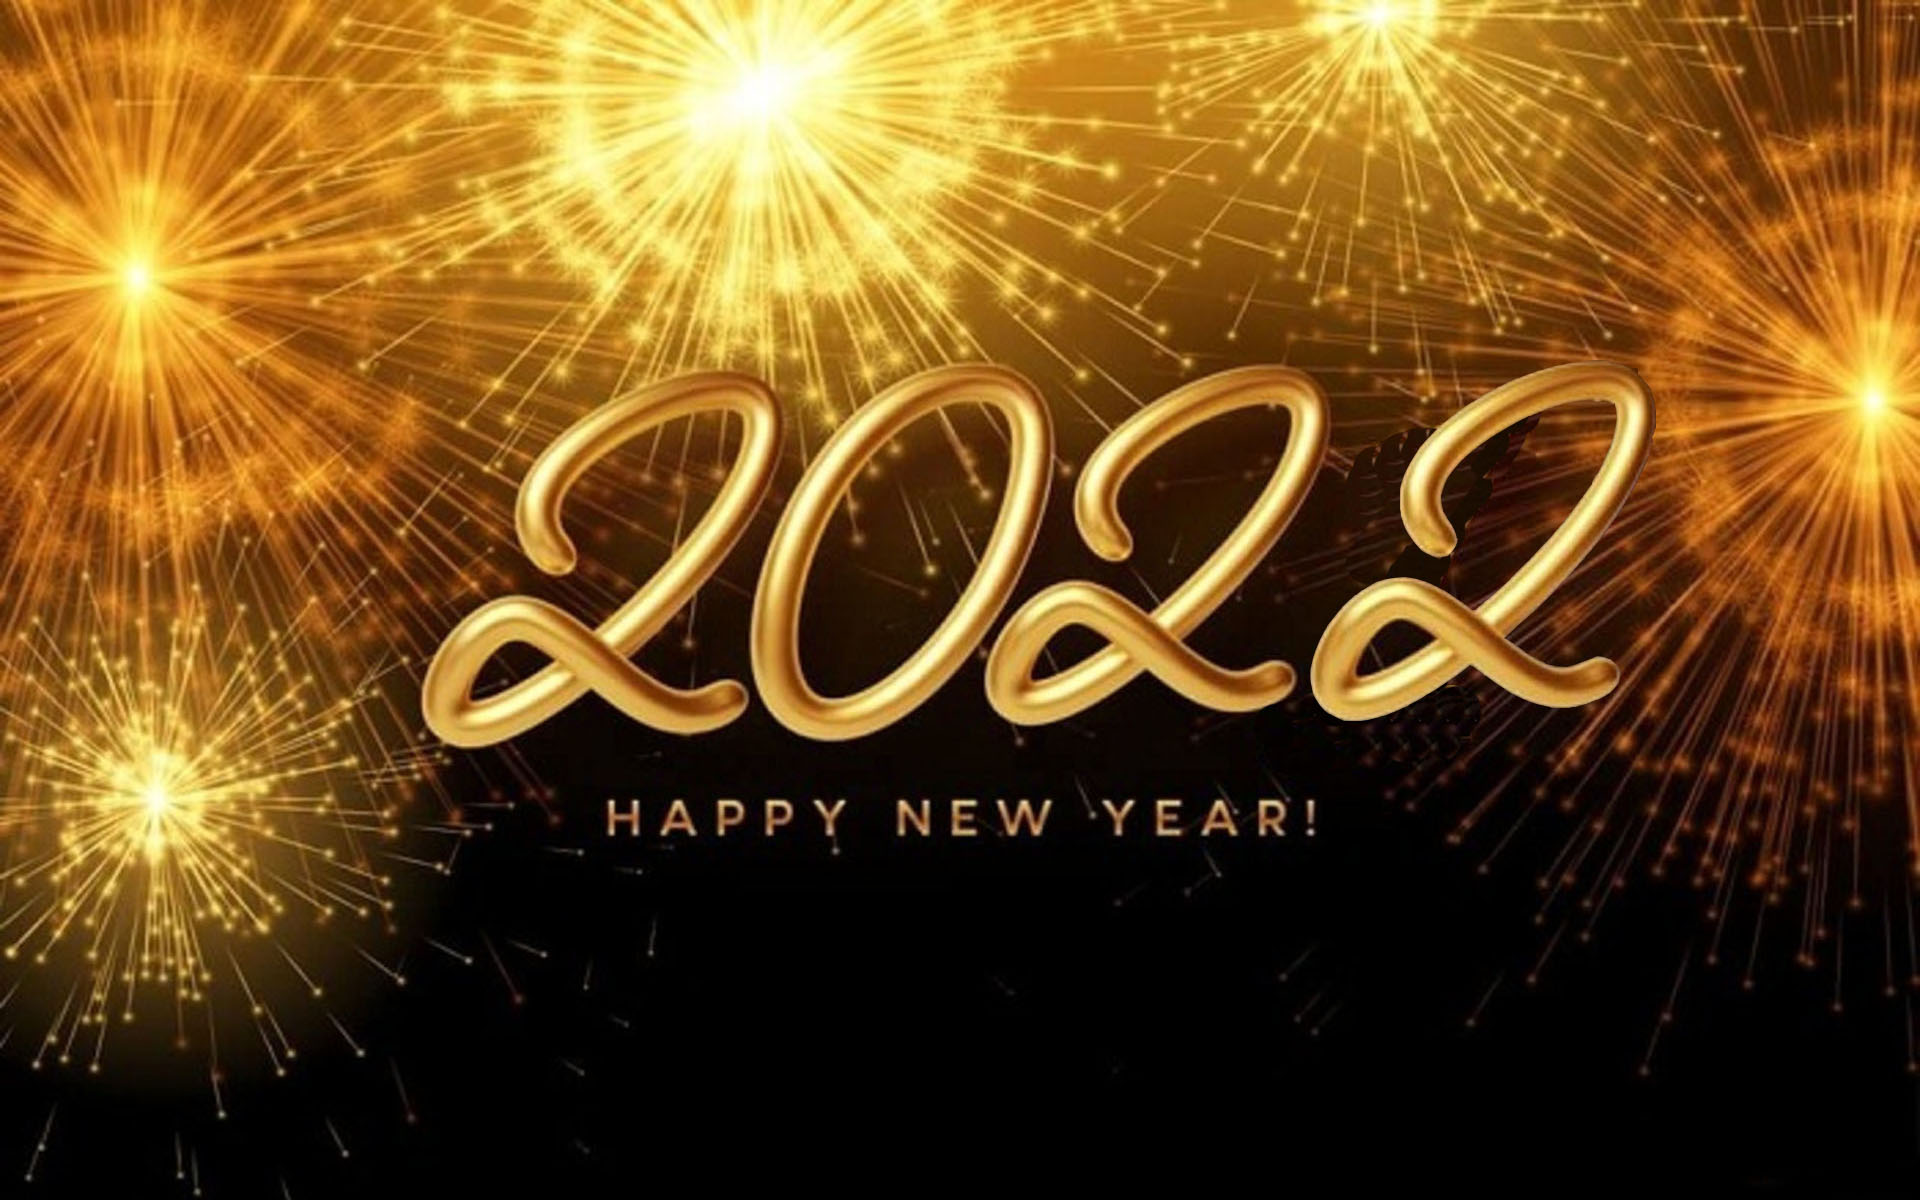 Happy New Year 2022 Golden Shiny Background With Bright Burning Fireworks :  